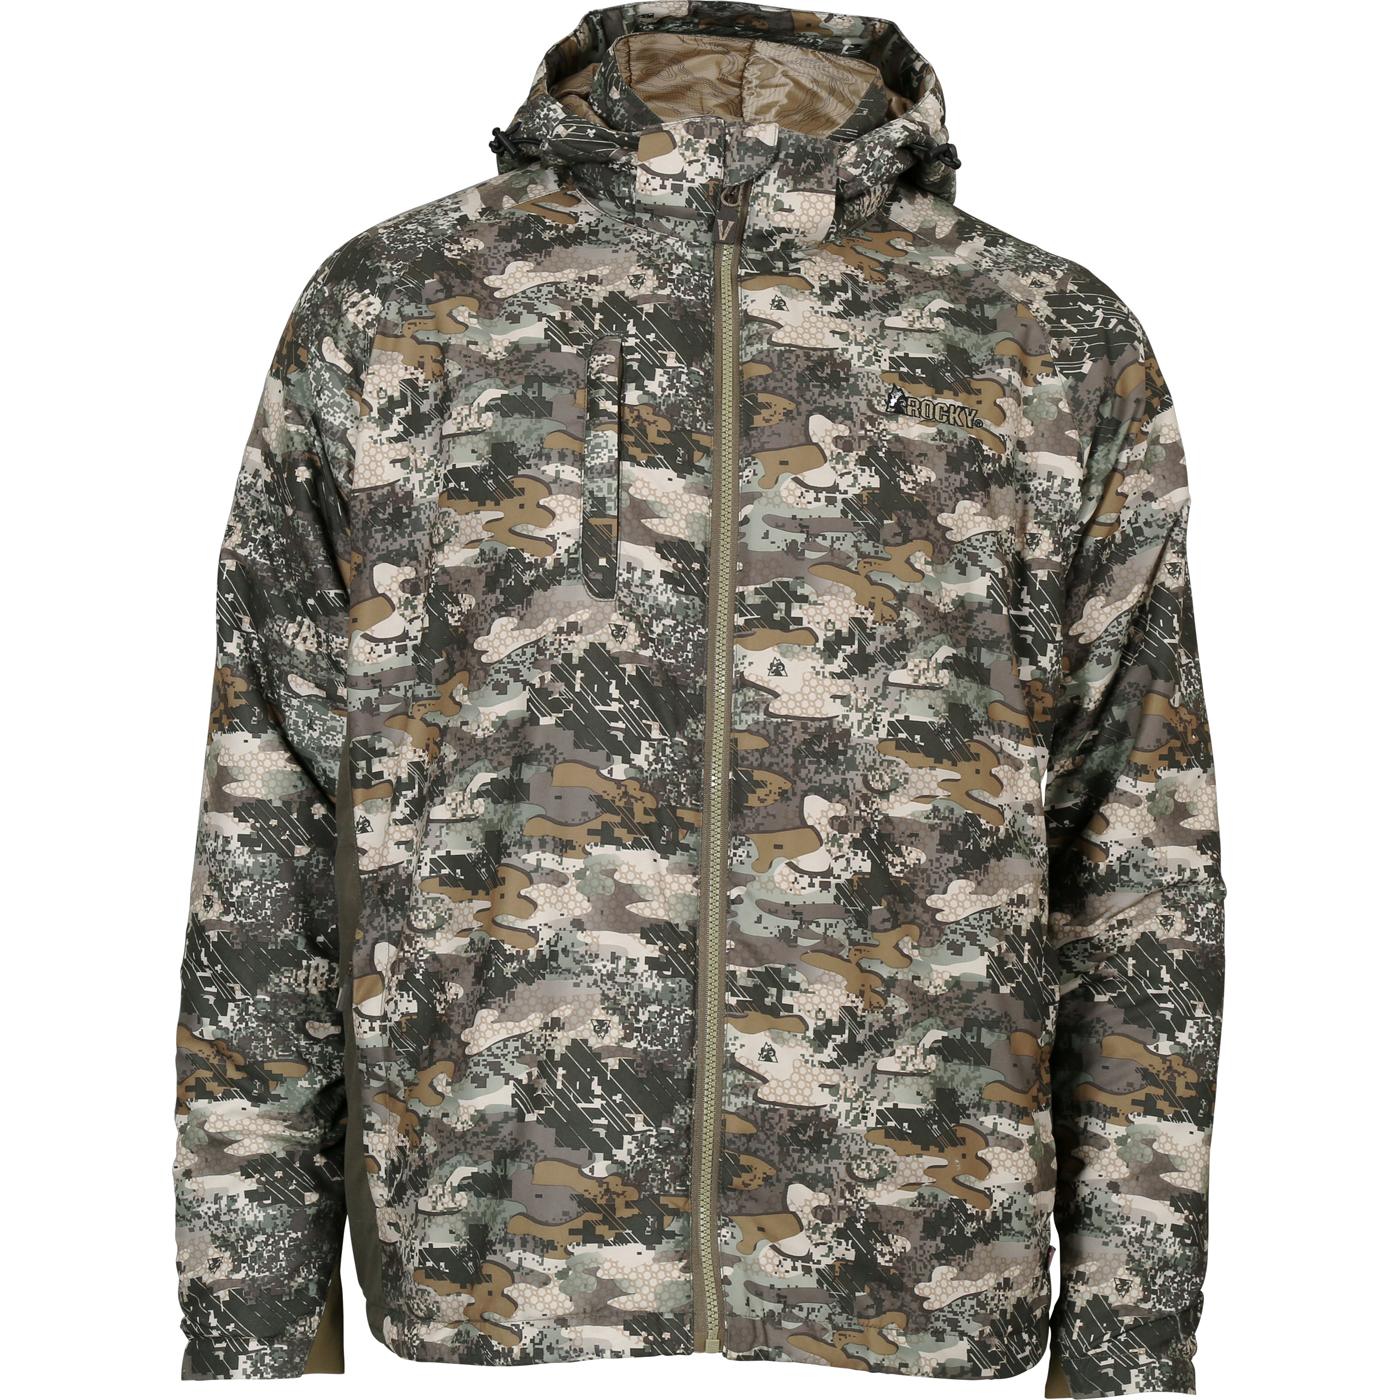 Rocky Camo Men's Insulated Packable Hunting Jacket, HW00155